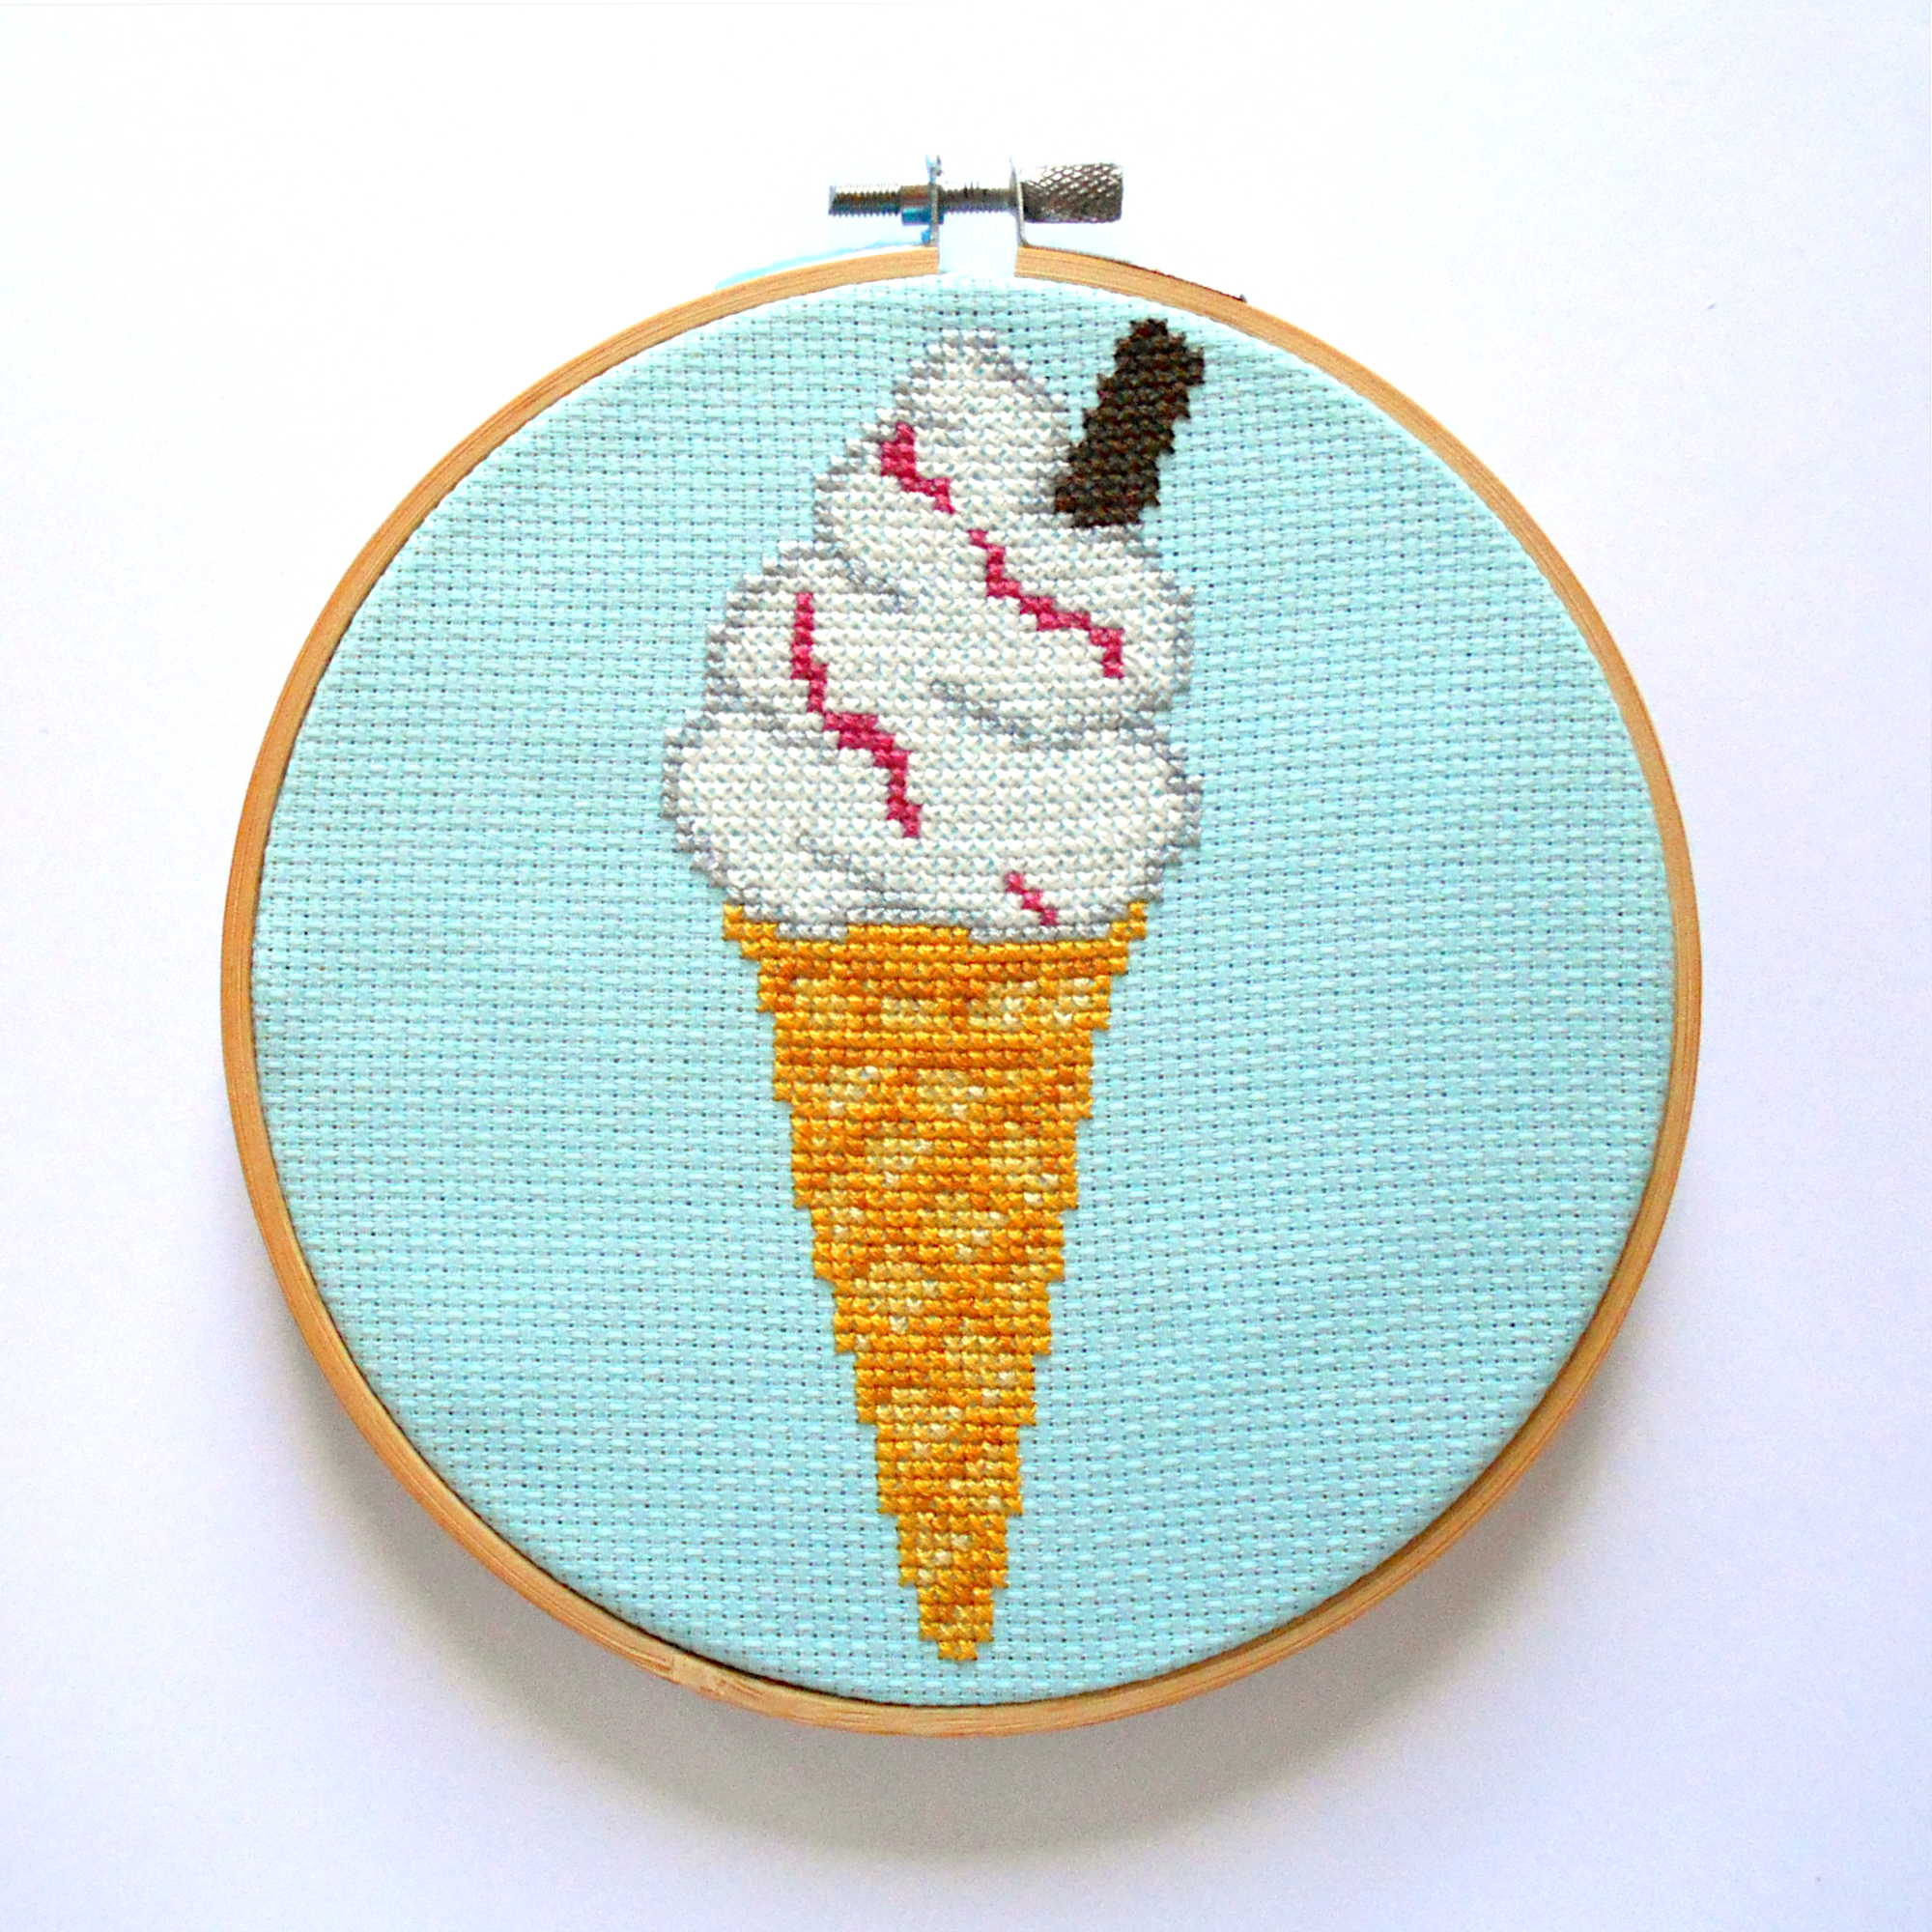 Cross stitch of a Mr Whippy ice cream cone with a flake (a 99) and sauce displayed in an embroidery hoop